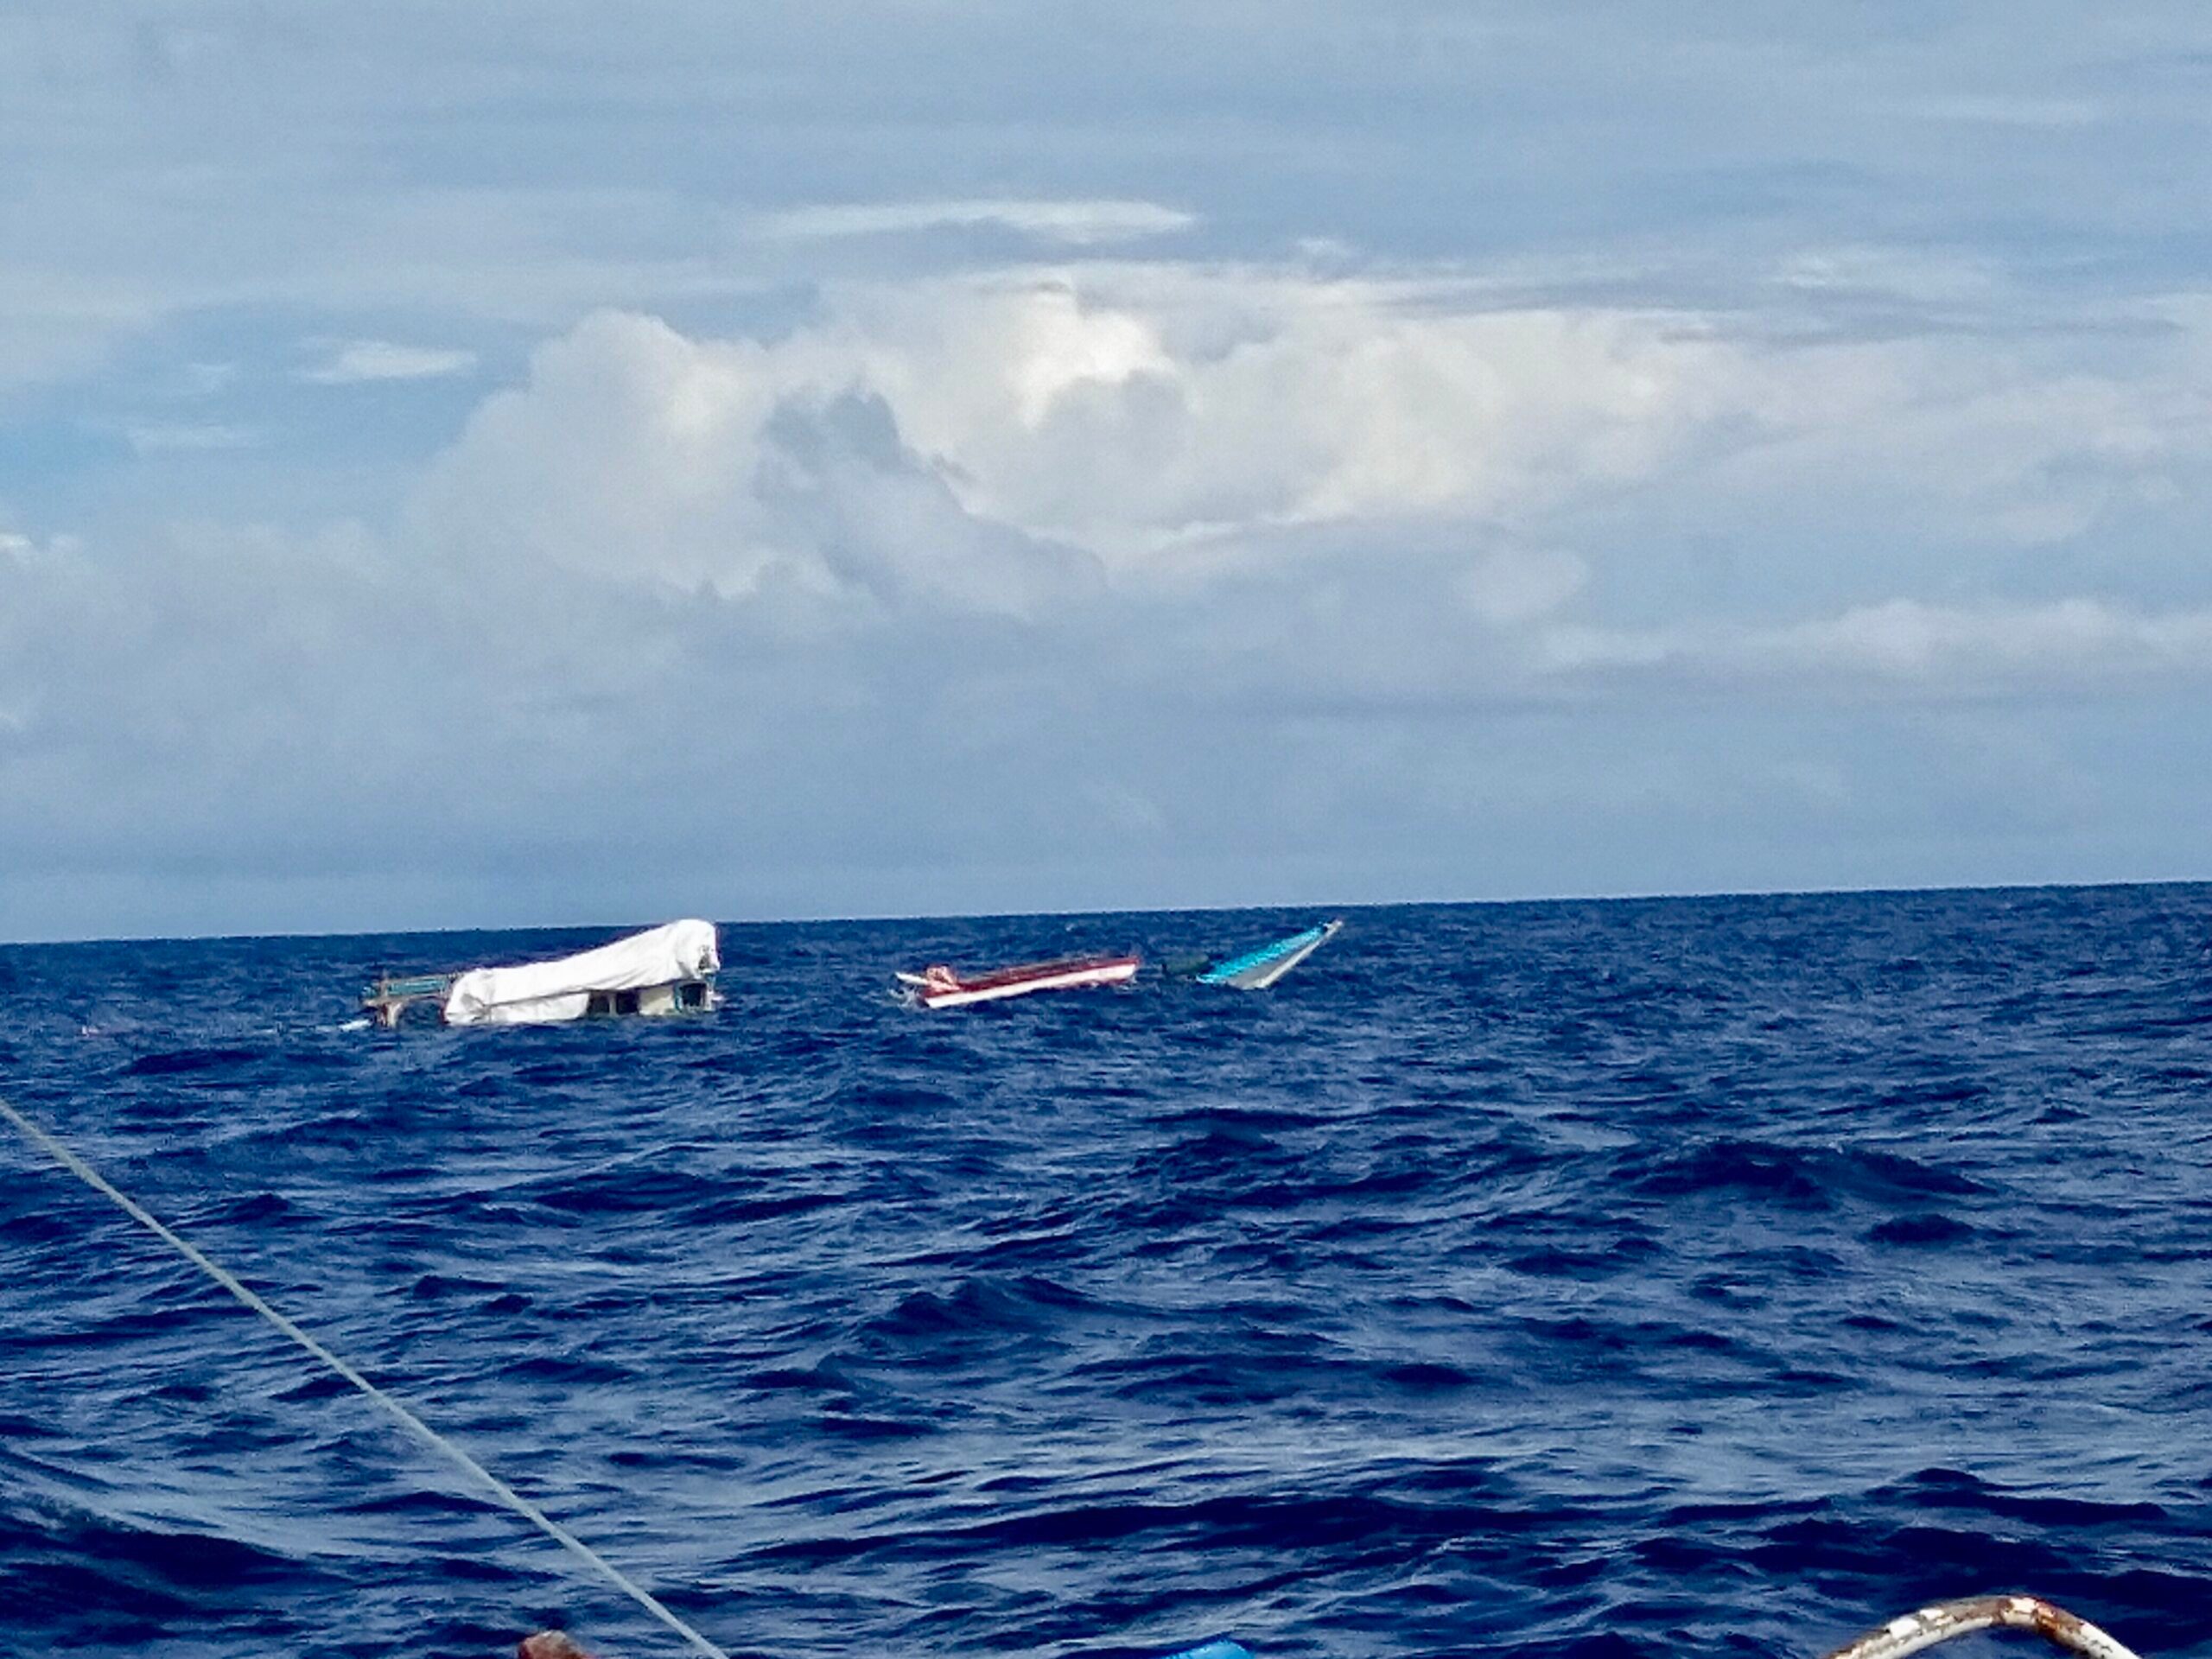 LOOK: Philippine boat sinking after Chinese ship’s assault